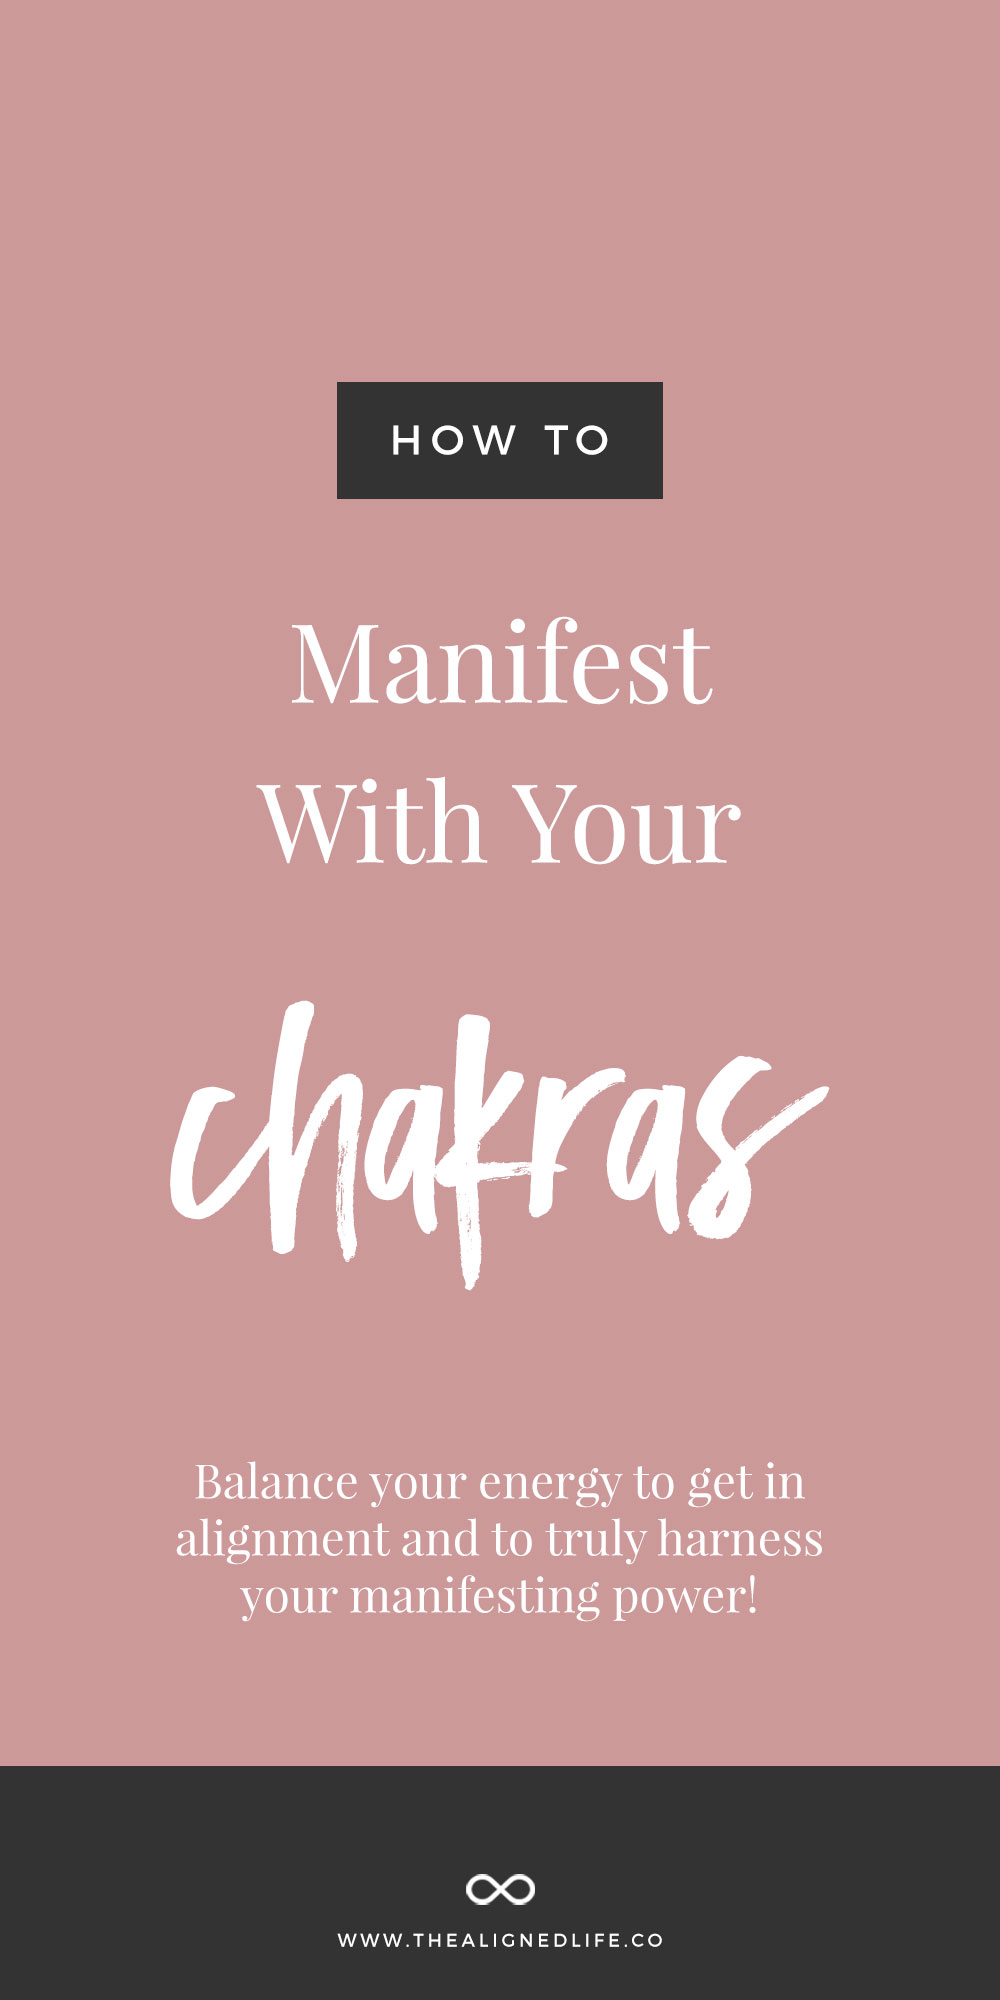 How To Manifest With Your Chakras